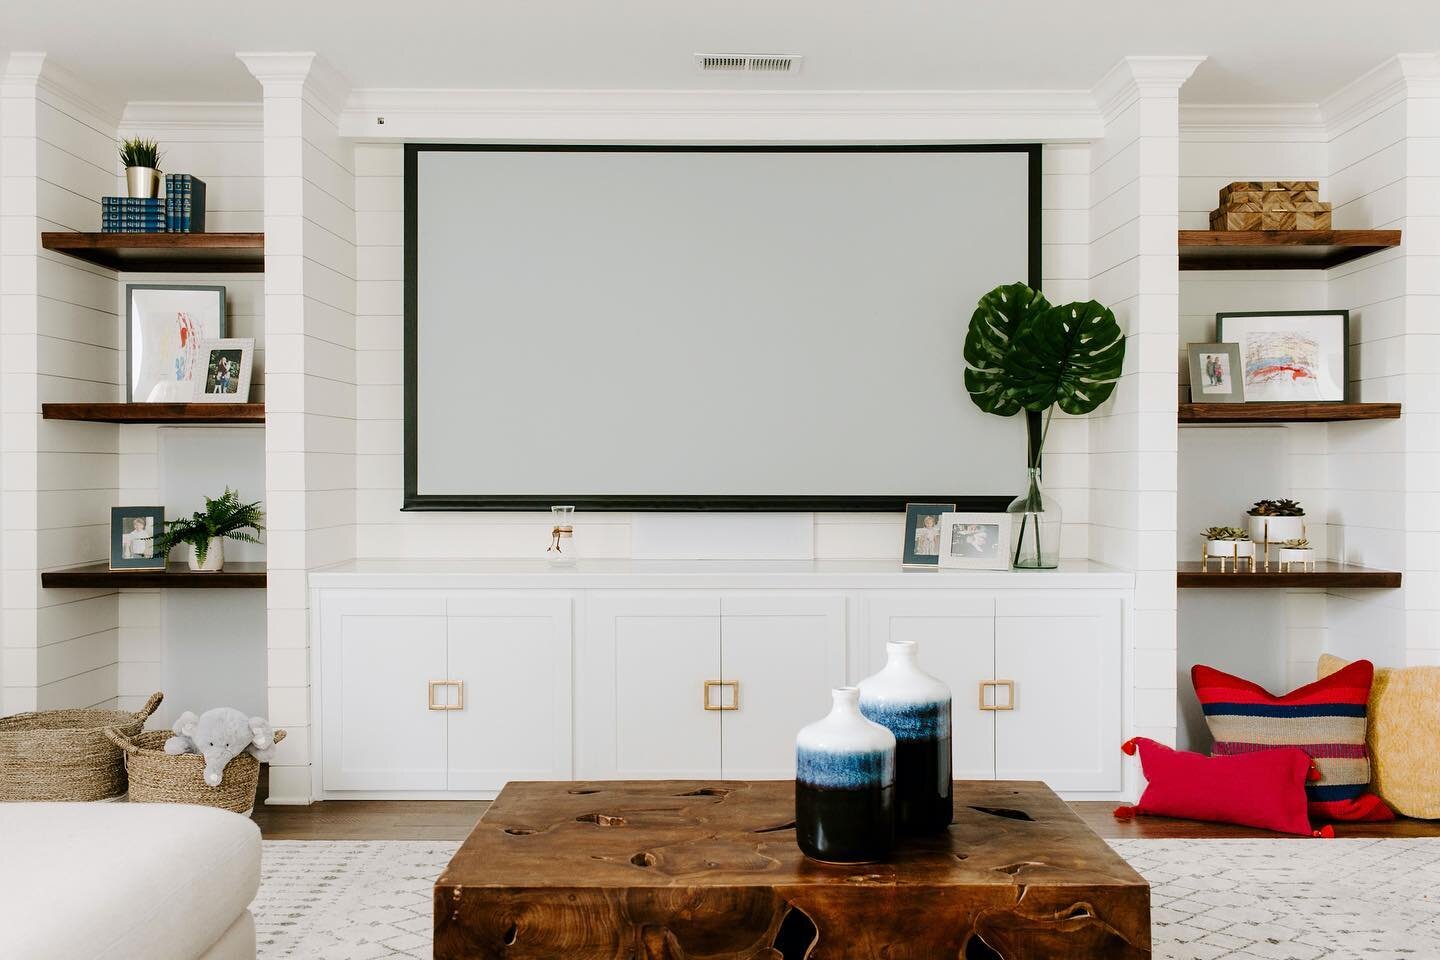 Transformation Tuesday, on a Wednesday! Transforming a movie and playroom!  We installed shiplap on the back wall and constructed a built in with floating wood shelves flanking the TV. Hidden behind the floating shelves we have concealed two surround